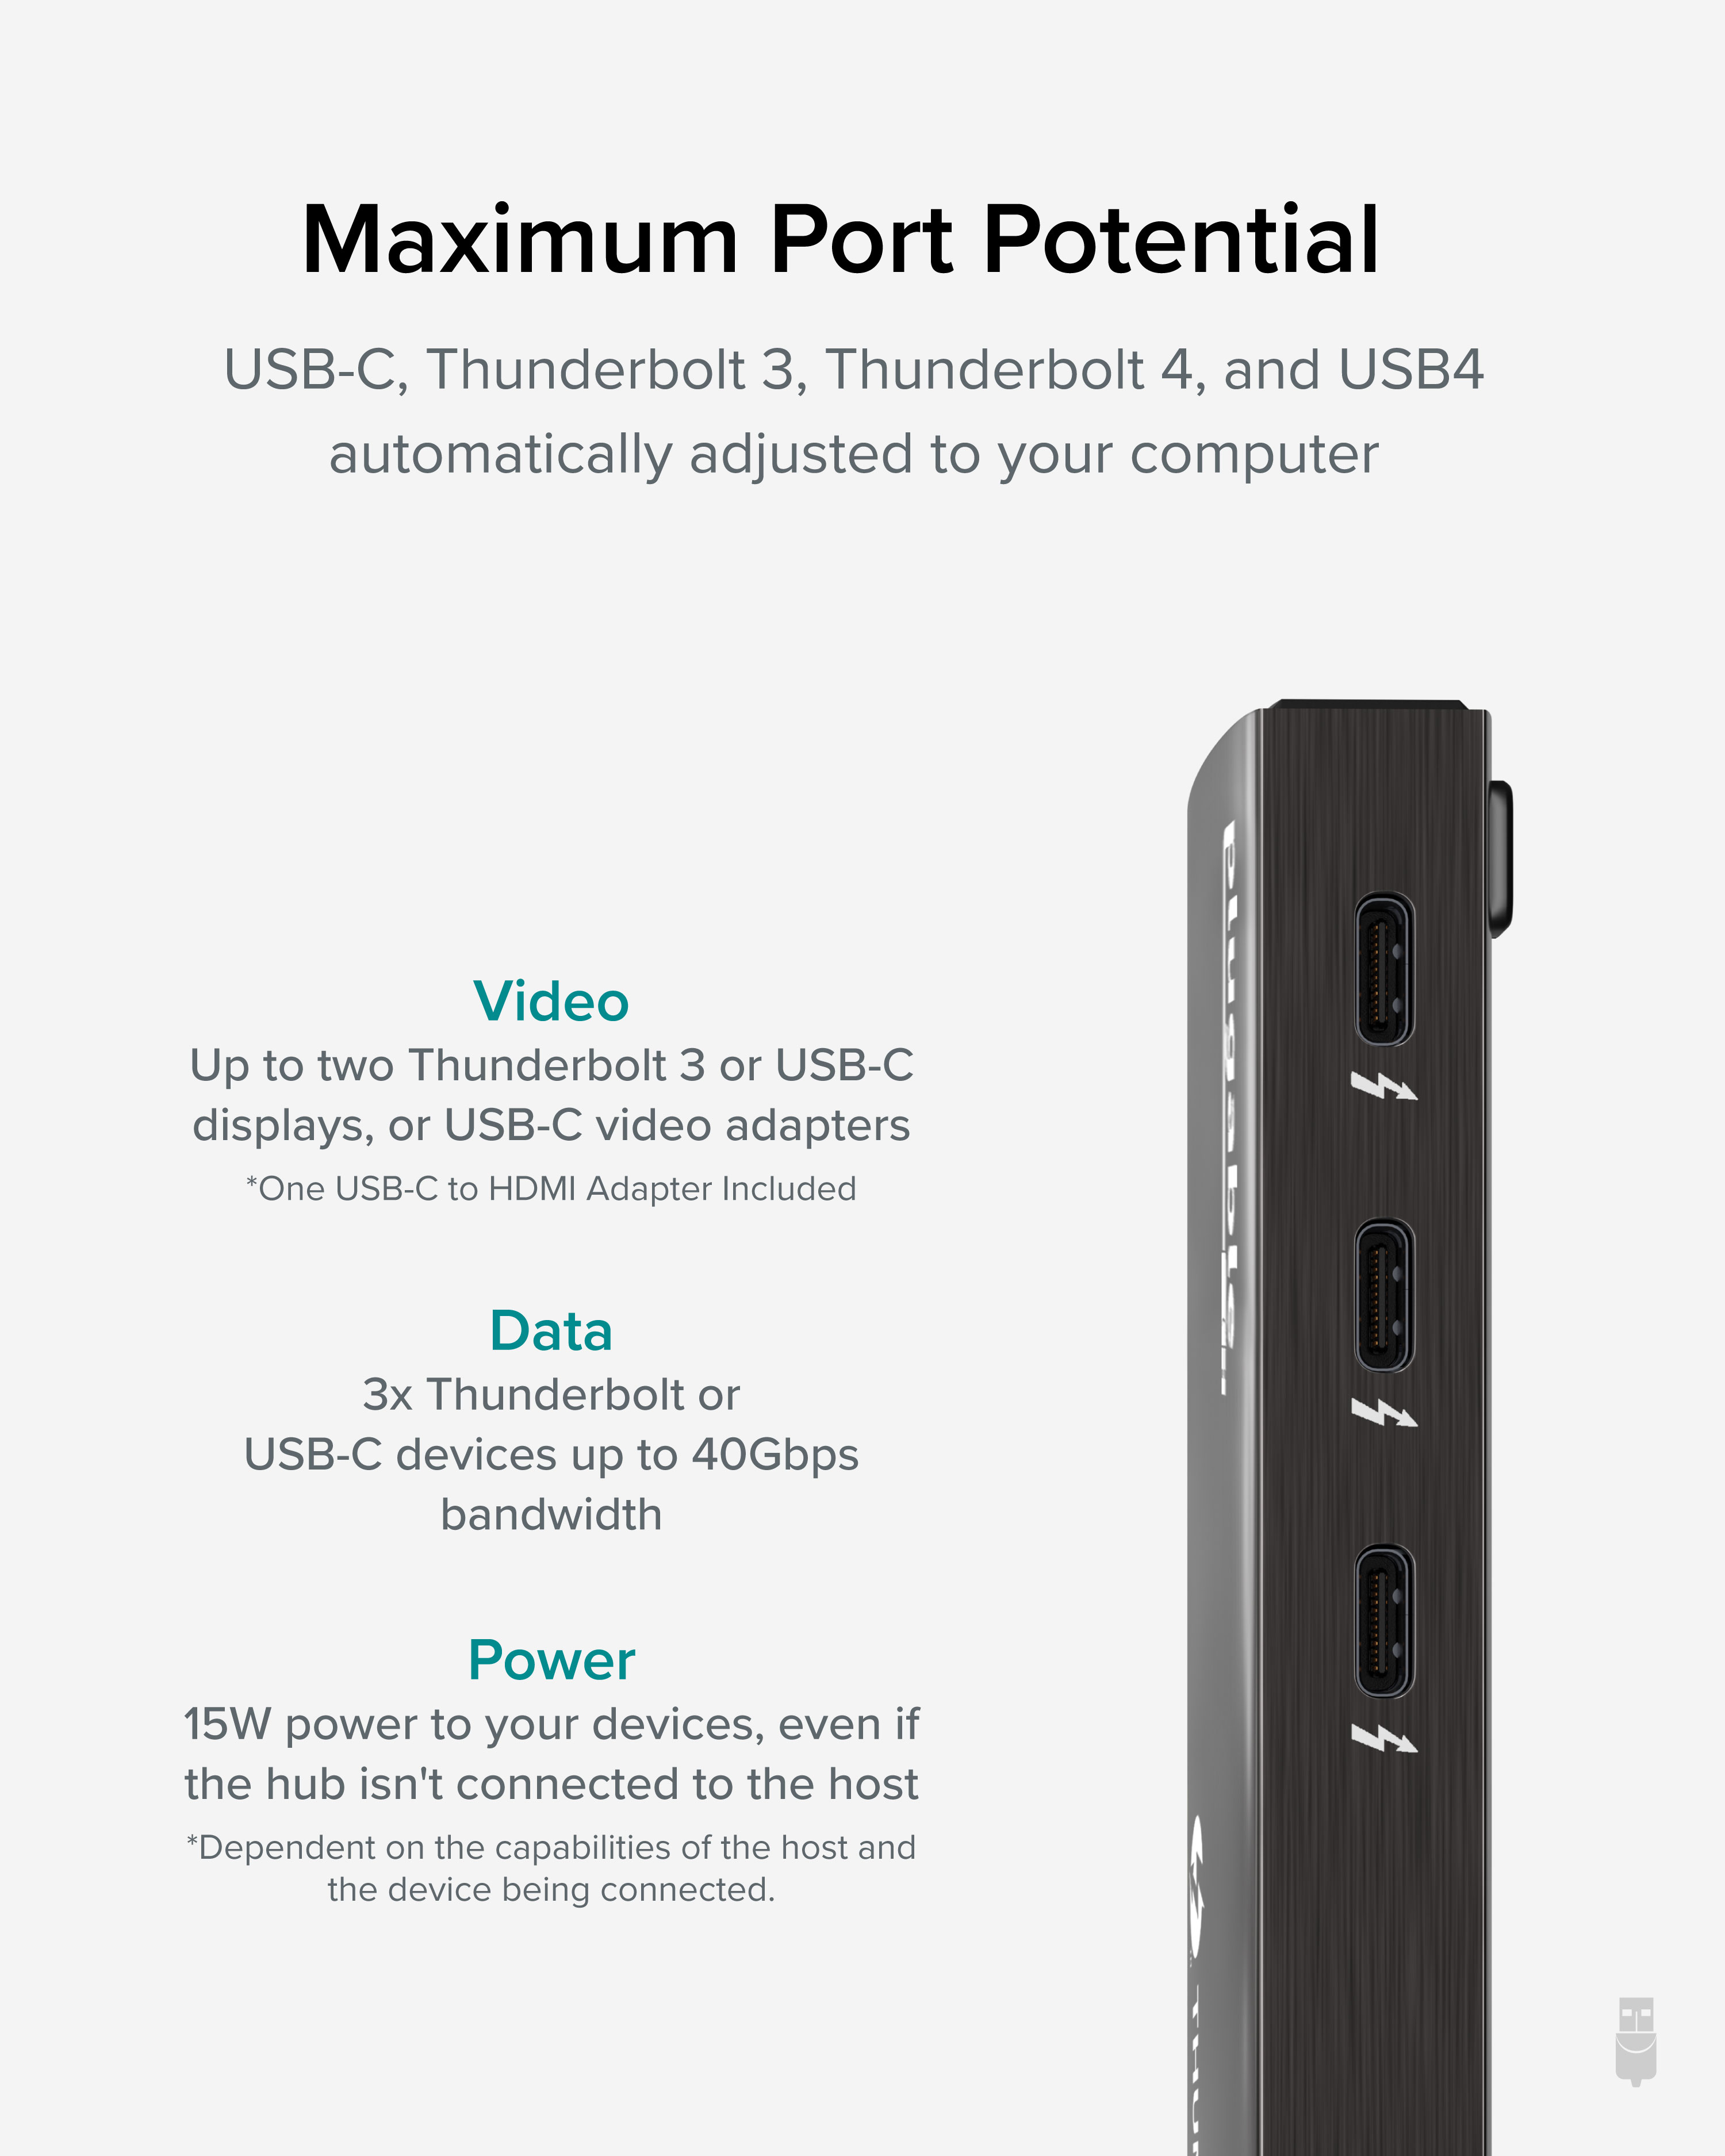 Plugable Thunderbolt 4 Hub, 4-in-1 Pure USB-C Design, Includes USB-C to 4K HDMI Adapter, 60W Laptop Charging, Compatible with Mac and Windows Laptops and USB-C, Thunderbolt 3 or 4, and USB4 devices - image 4 of 8